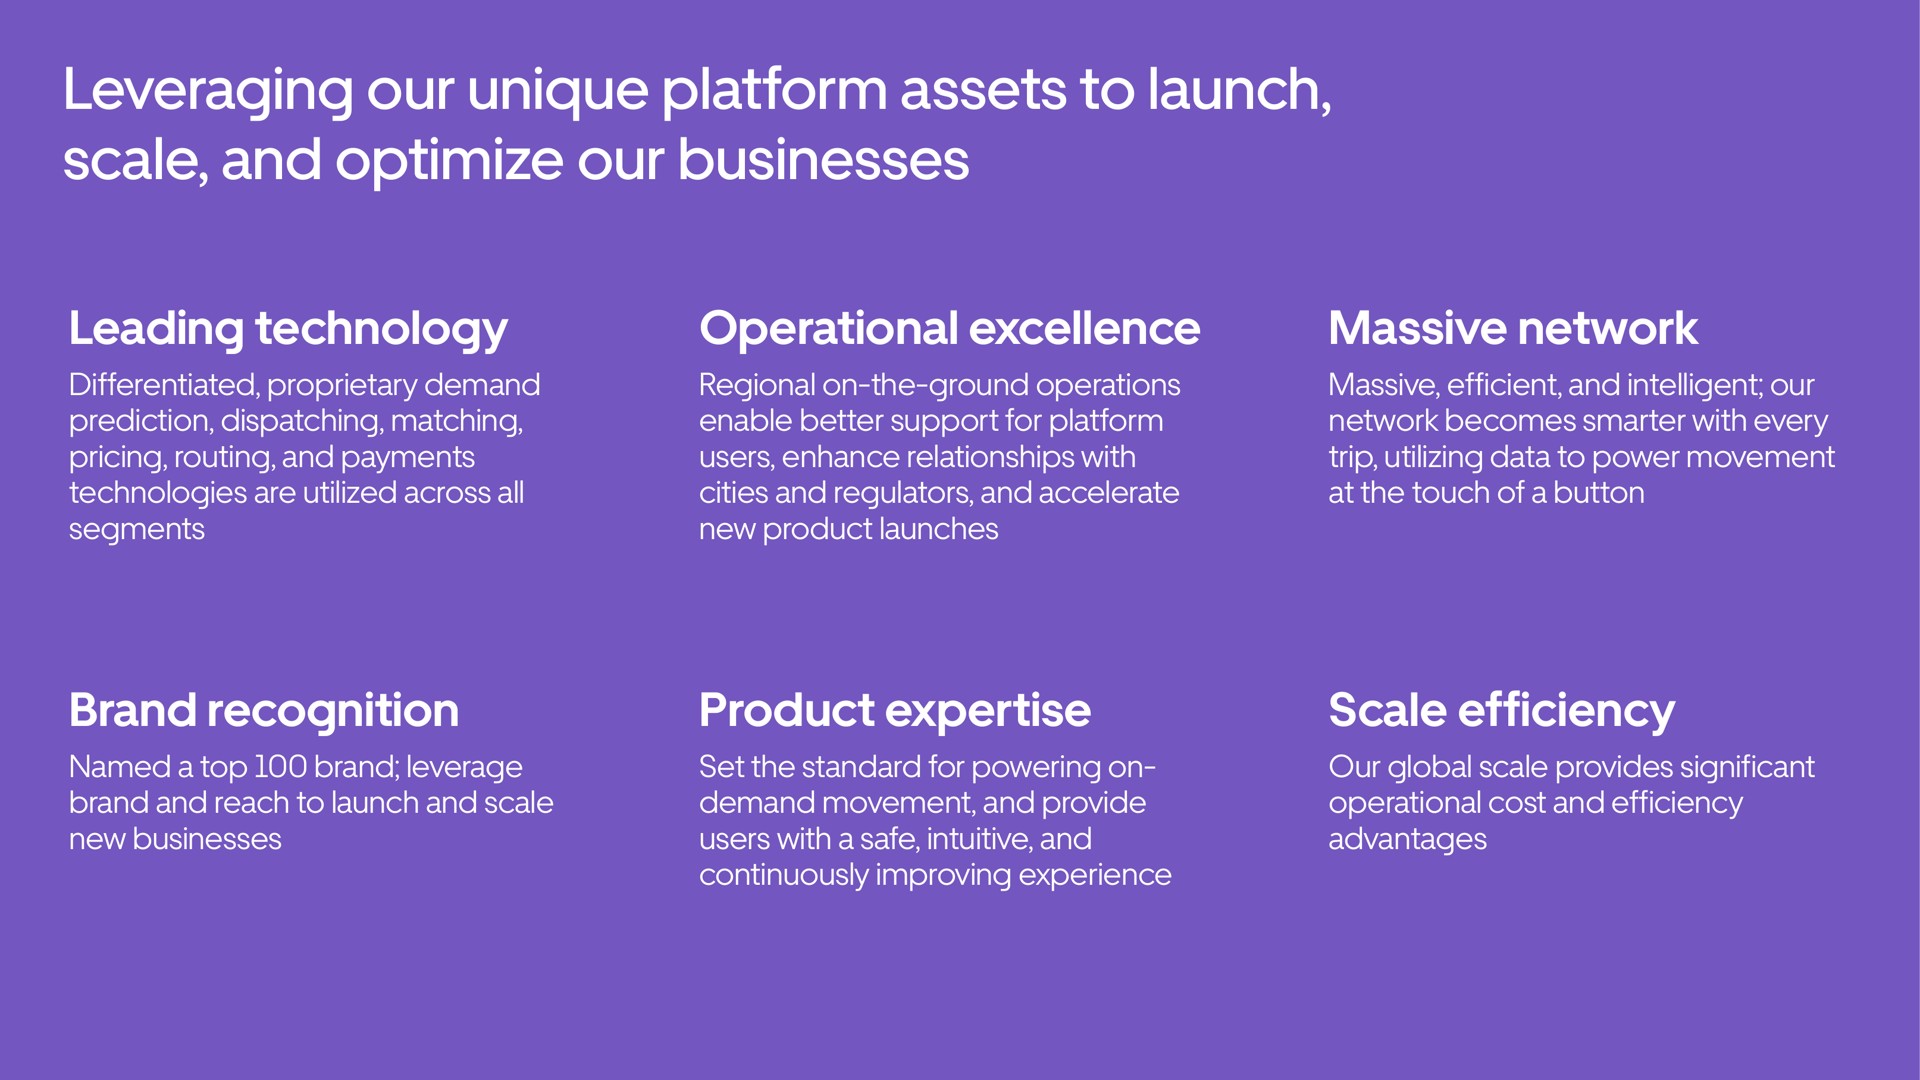 leveraging our unique platform assets to launch scale and optimize our businesses | Uber